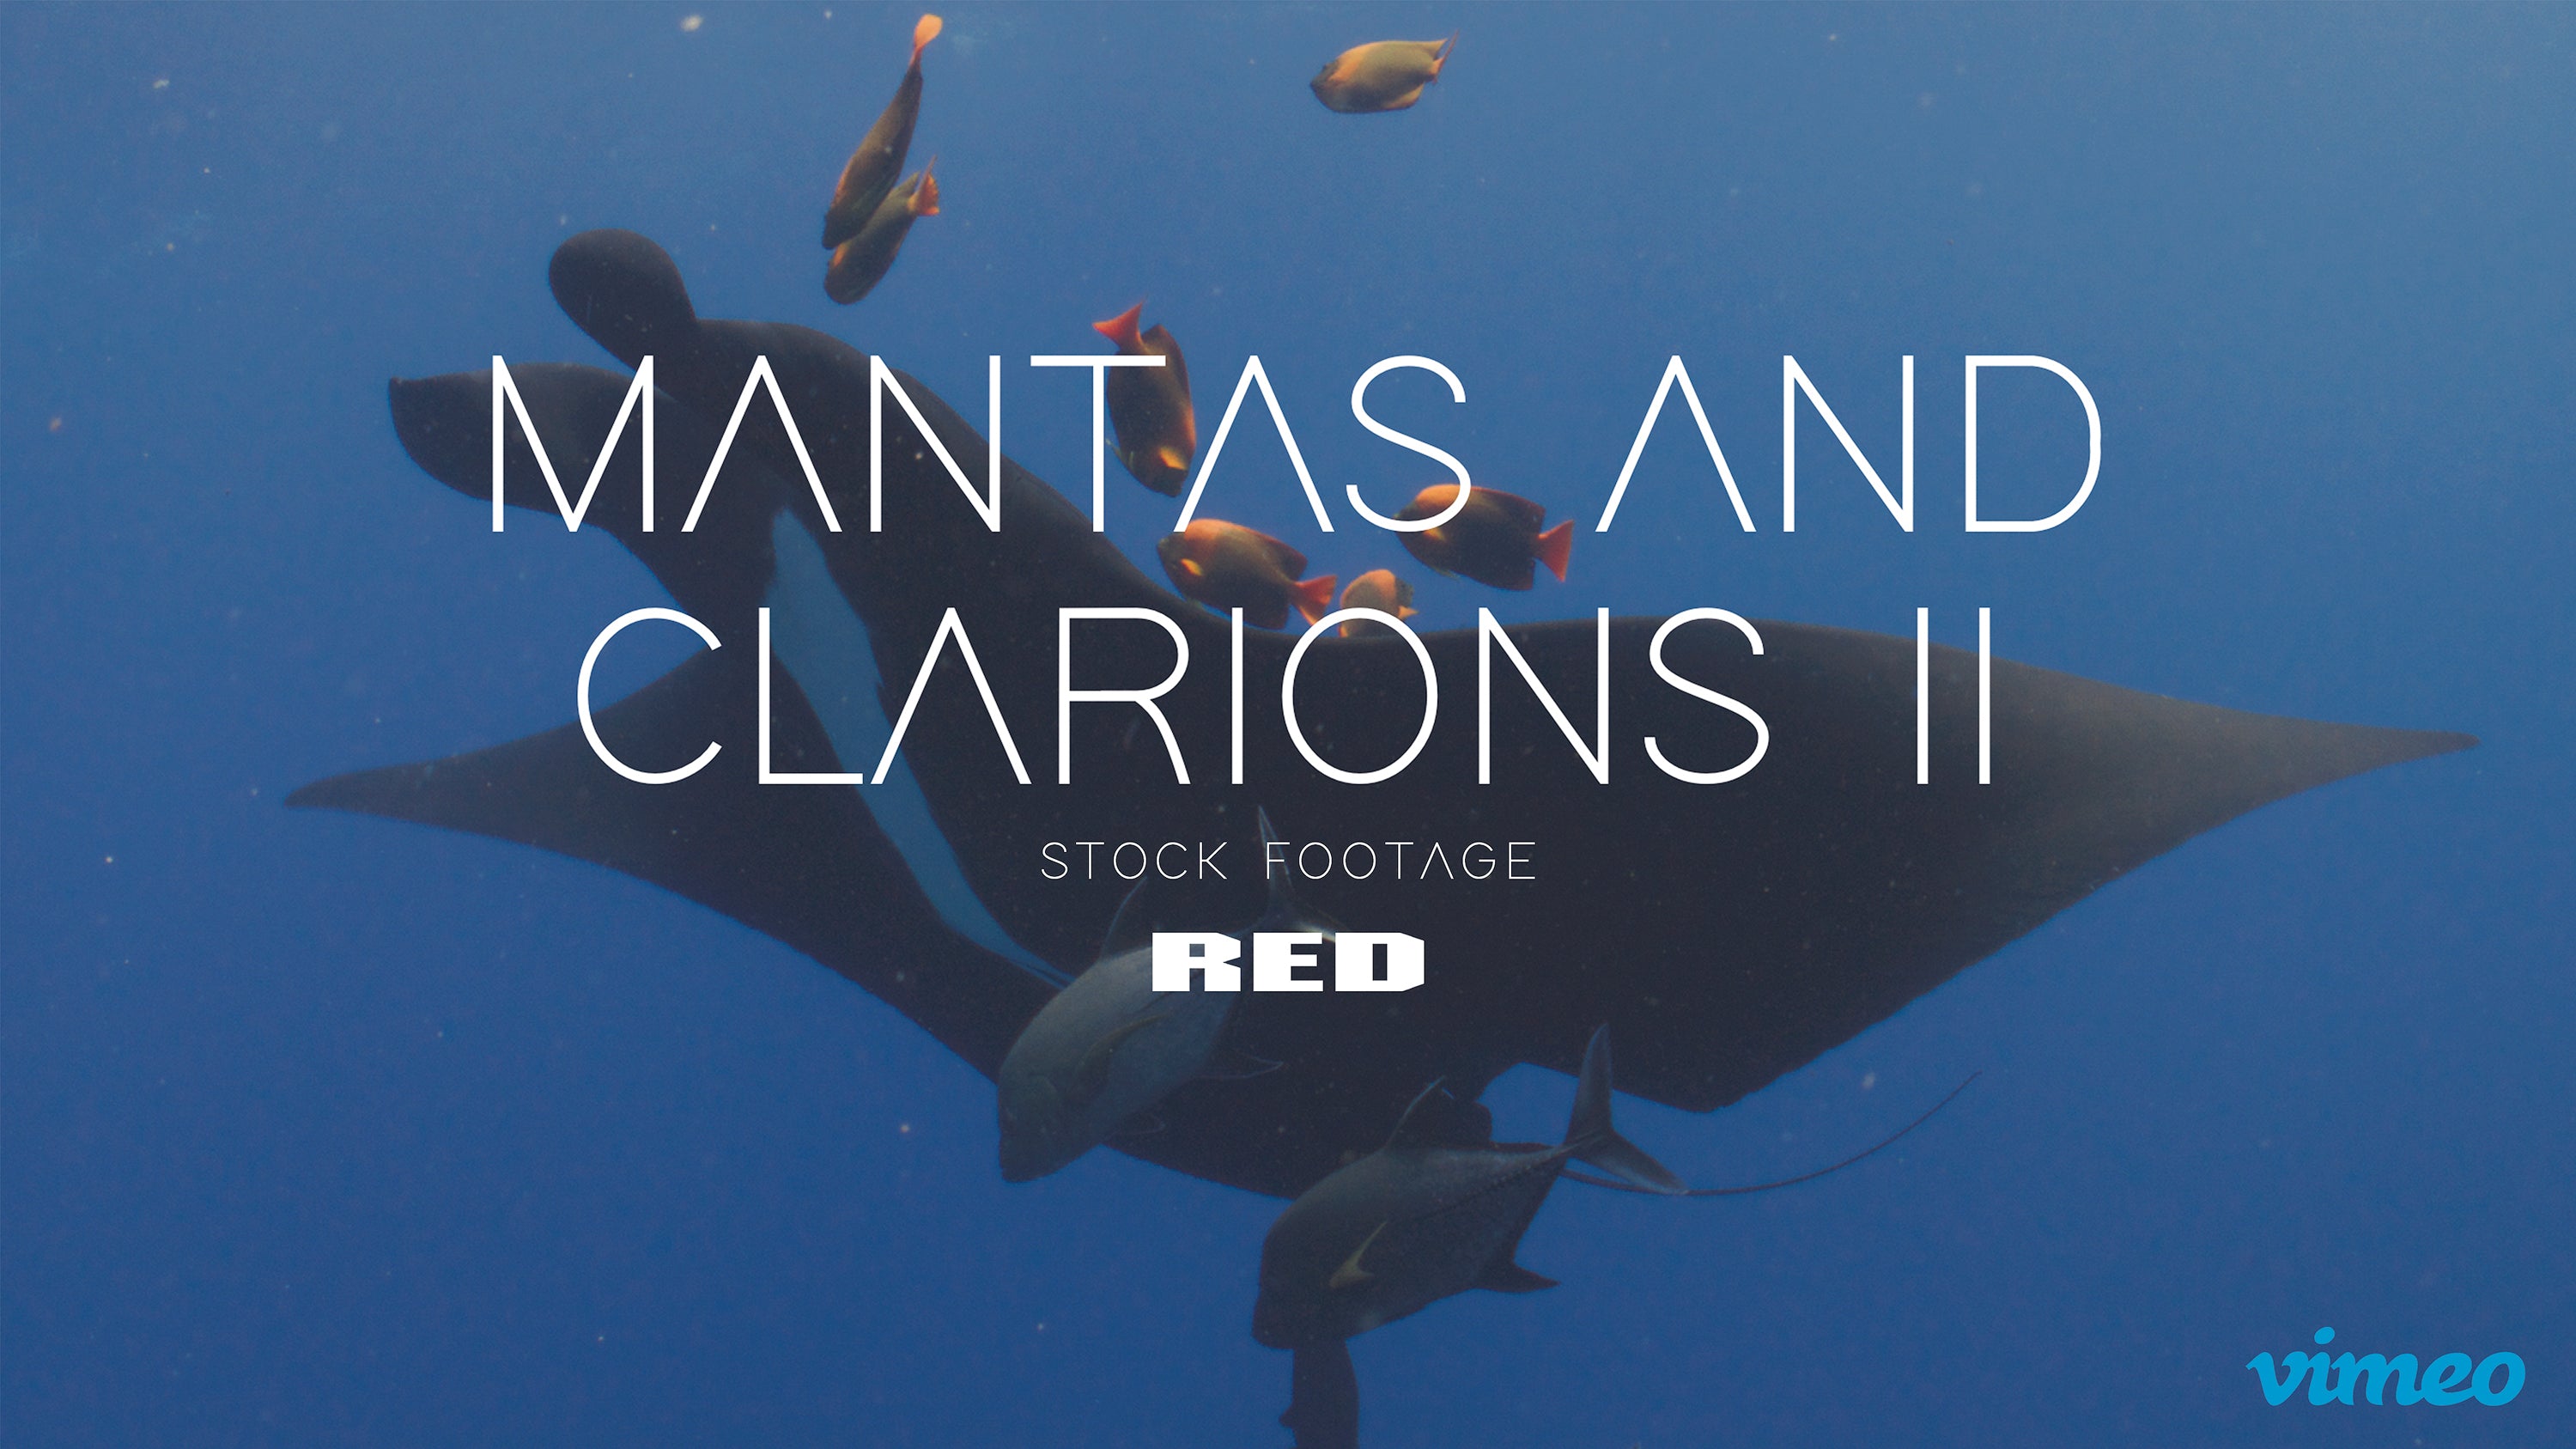 Mantas and clarions II